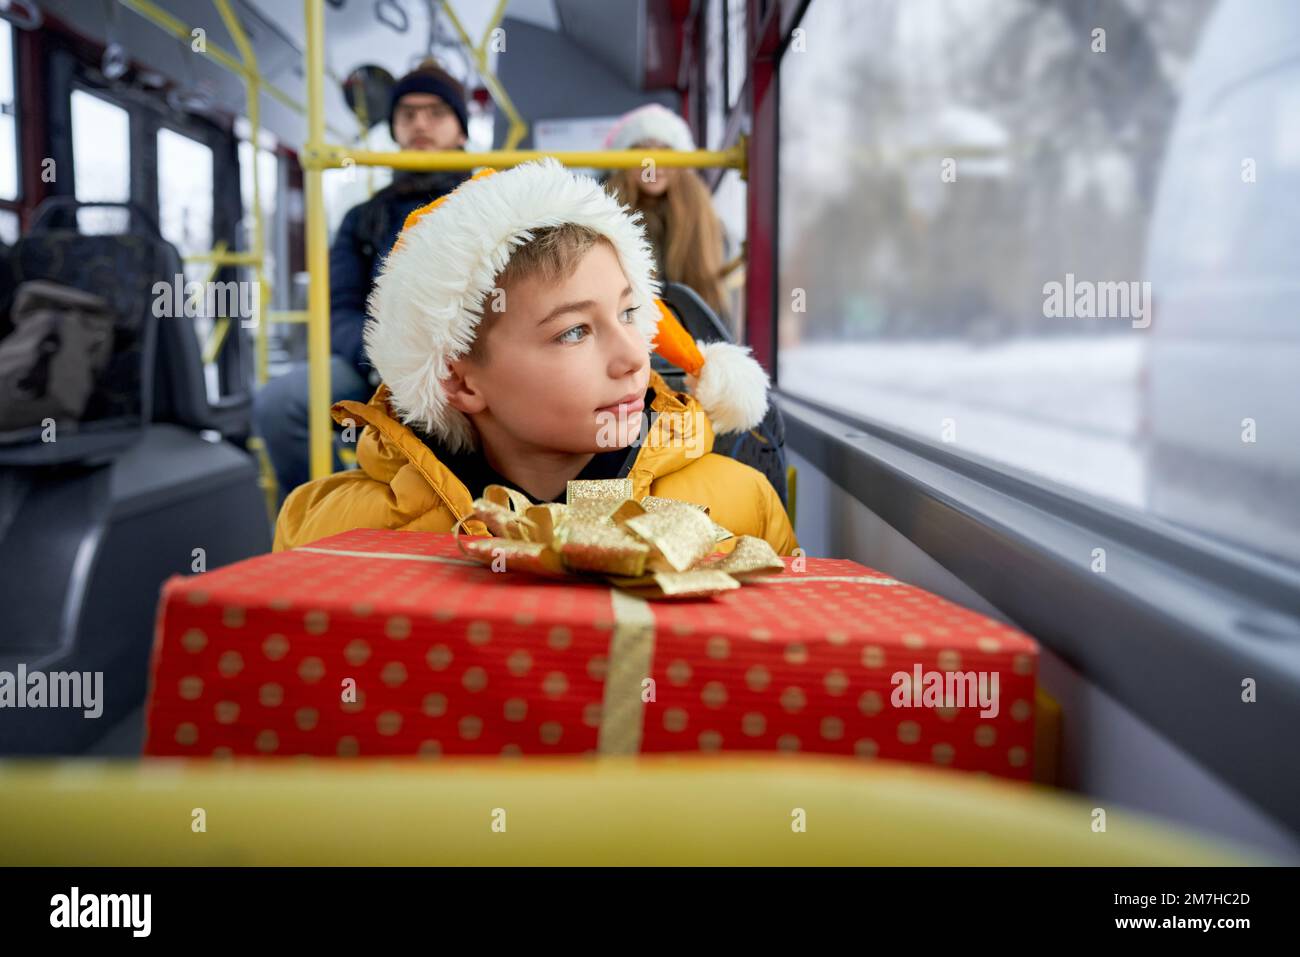 Front view of passengers traveling by means of public transport druring winter, Christmas holidays. Boy sitting, holding present, looking through window. Concept of winter. Stock Photo